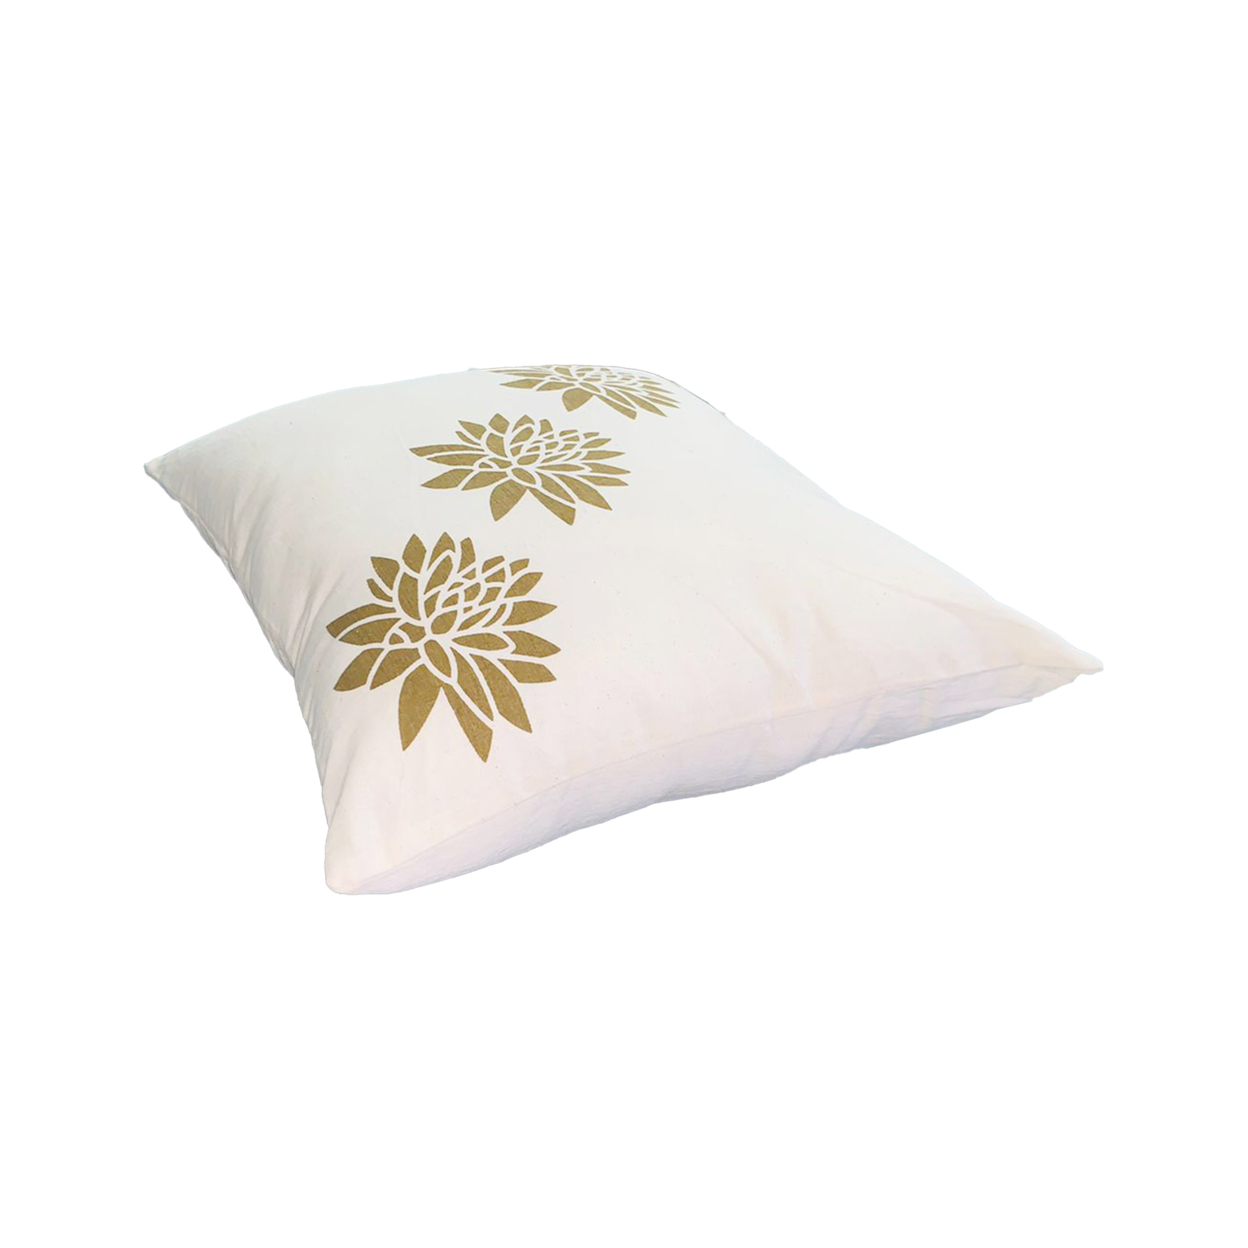 18 X 18 Square Accent Pillows, Soft Cotton Cover, Printed Lotus Flower, Set Of 2, Gold, White